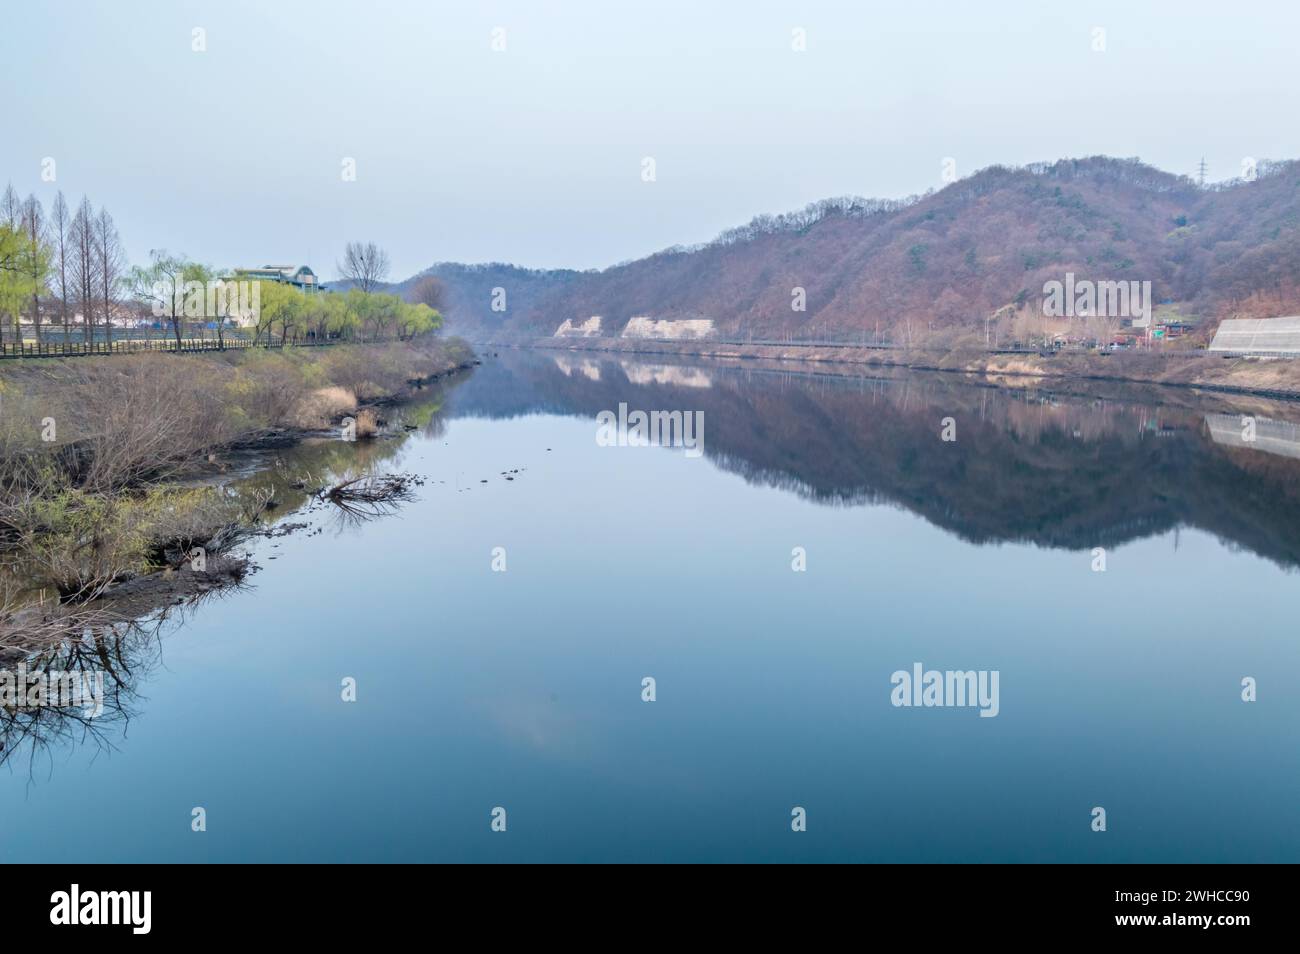 Landscape of Gold River and Road House Park near Daejeon, South Korea Stock Photo